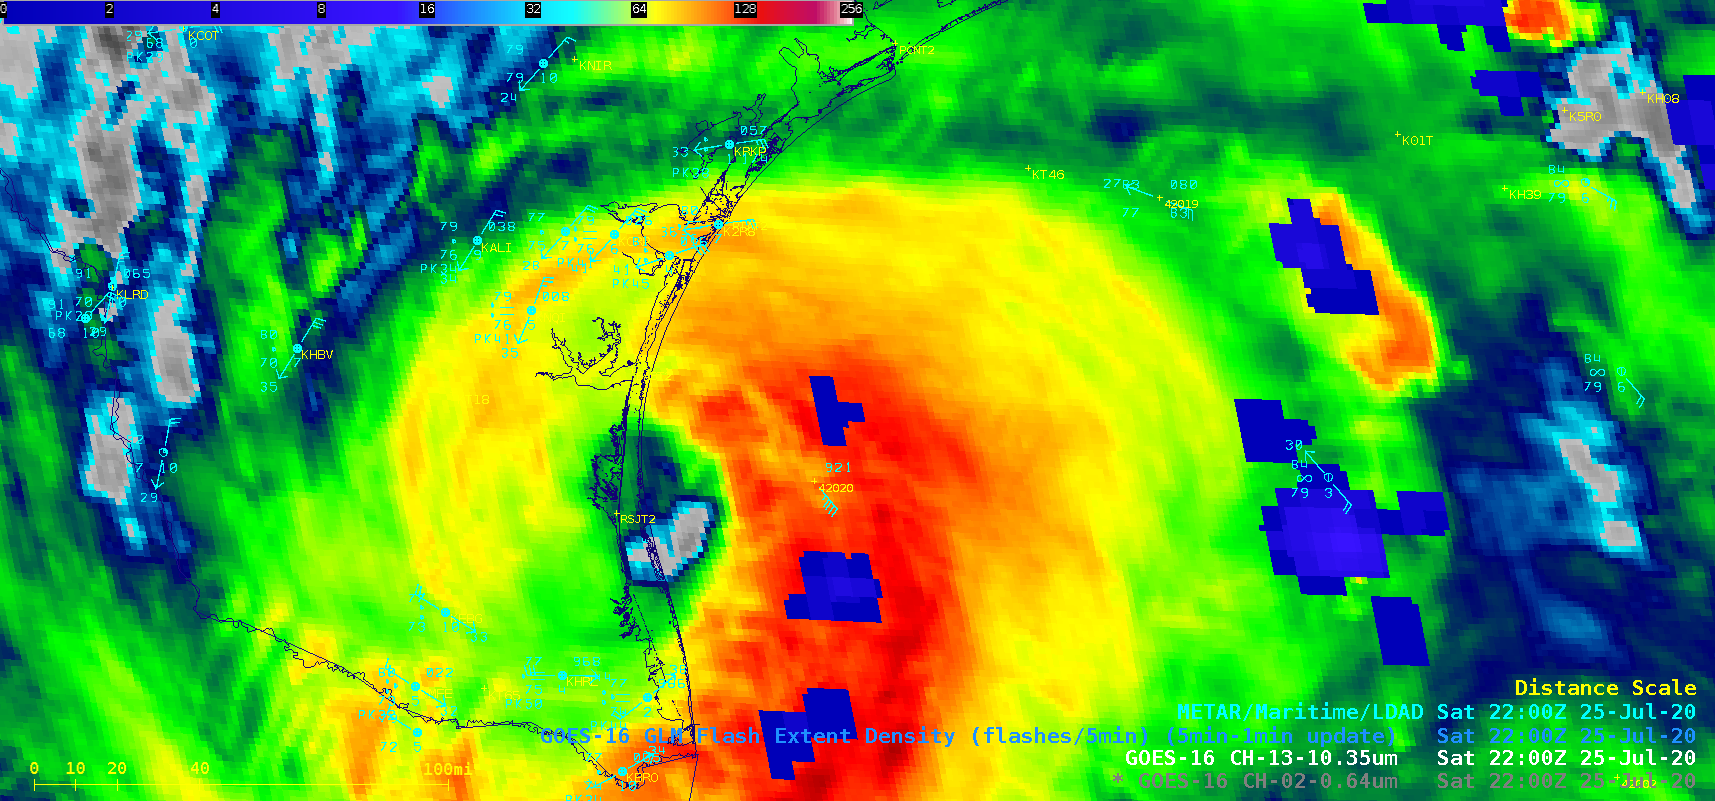 GOES-16 “Clean” Infrared Window (10.35 µm) images, with an overlay of GLM Flash Extent Density [click to play animation | MP4]